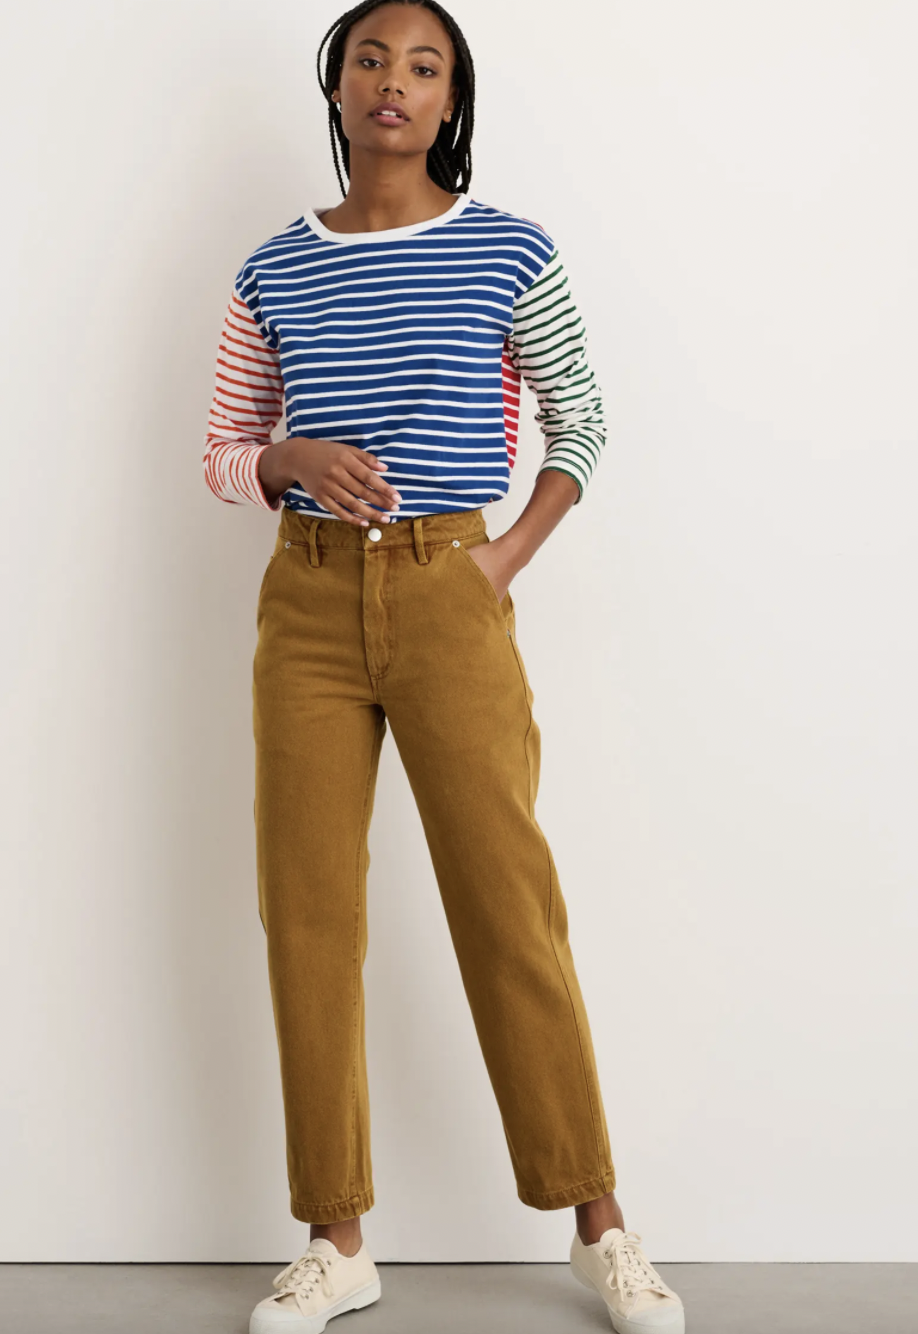 Six Striped Pieces I'd Love to Wear All Fall